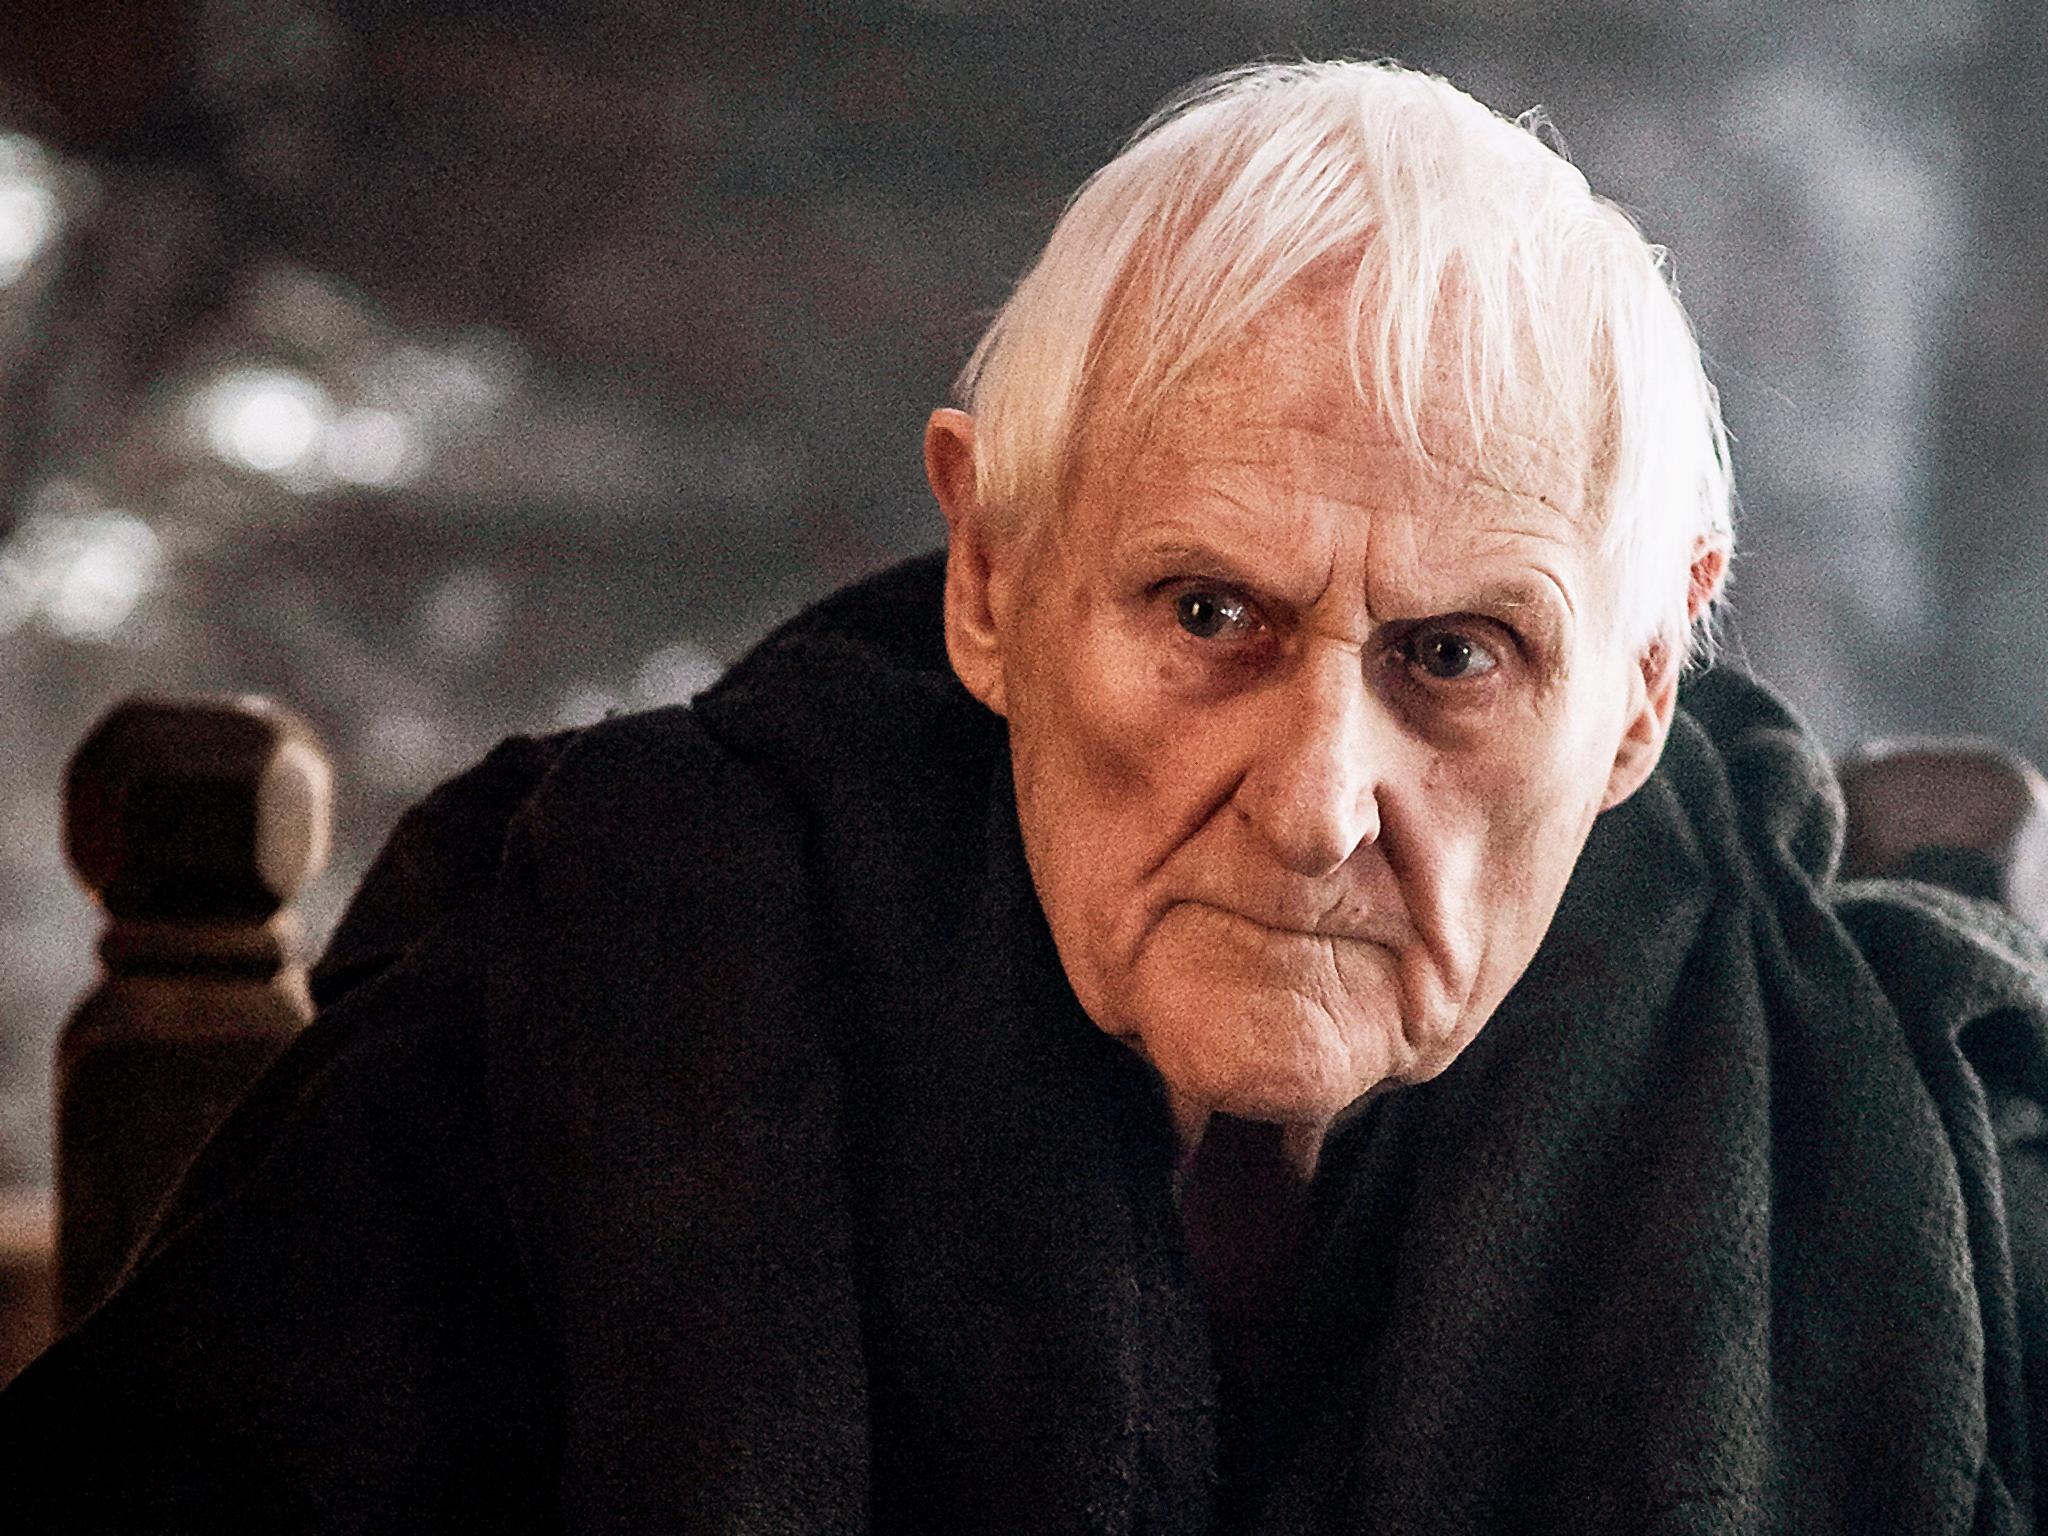 The veteran actor won a new generation of fans with his portrayal of Maester Aemon in ‘Game of Thrones’